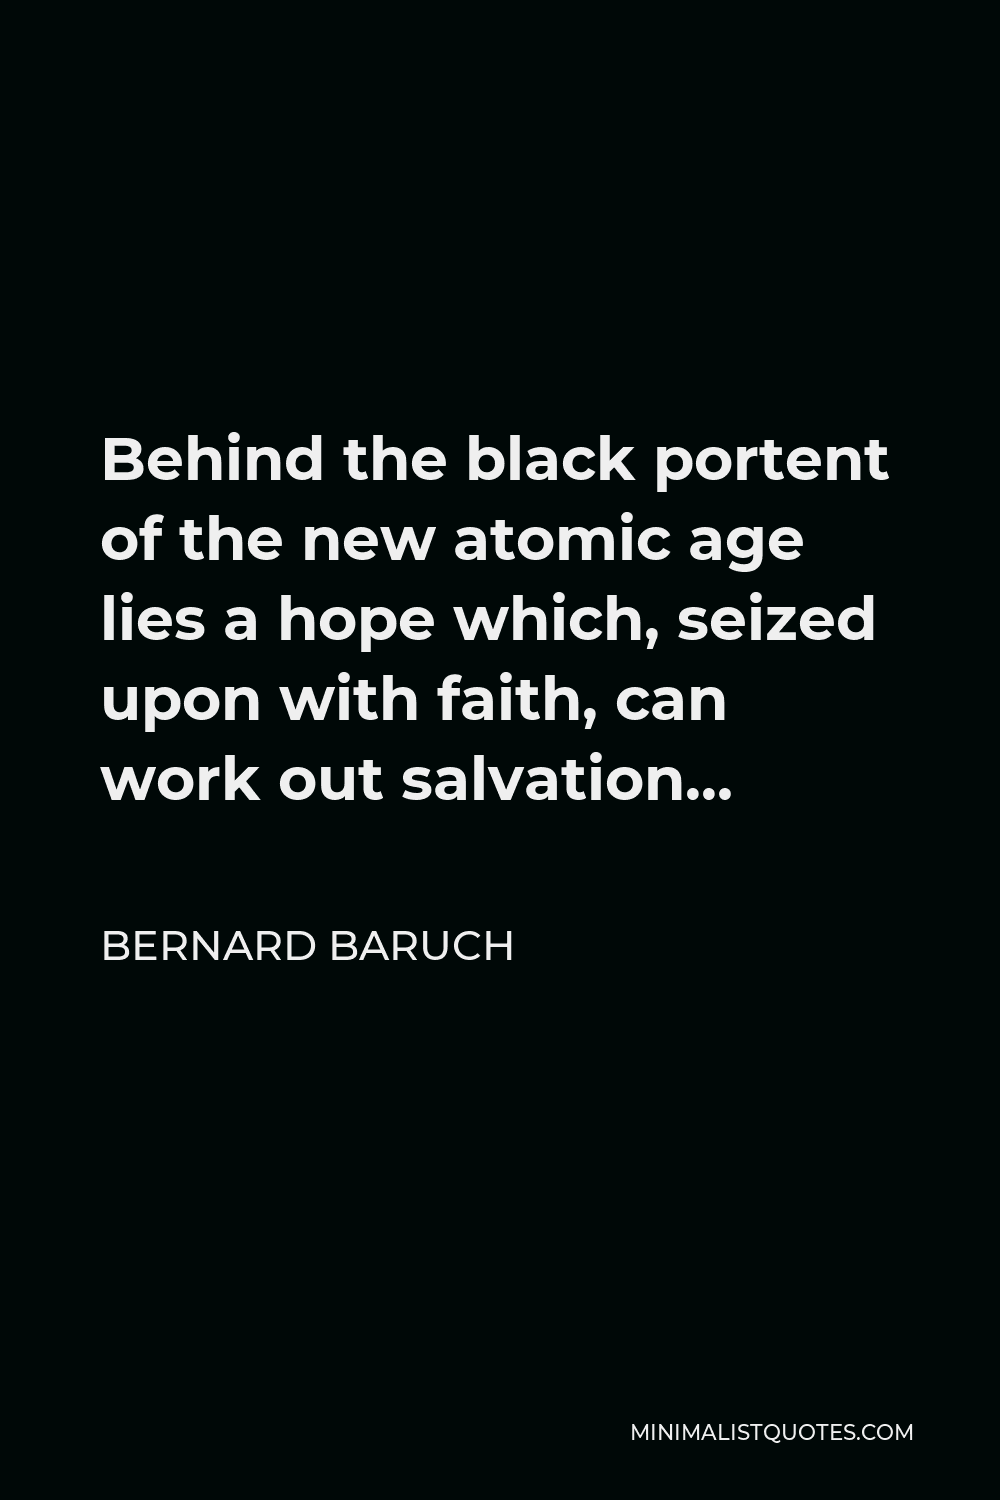 Bernard Baruch Quote - Behind the black portent of the new atomic age lies a hope which, seized upon with faith, can work out salvation…